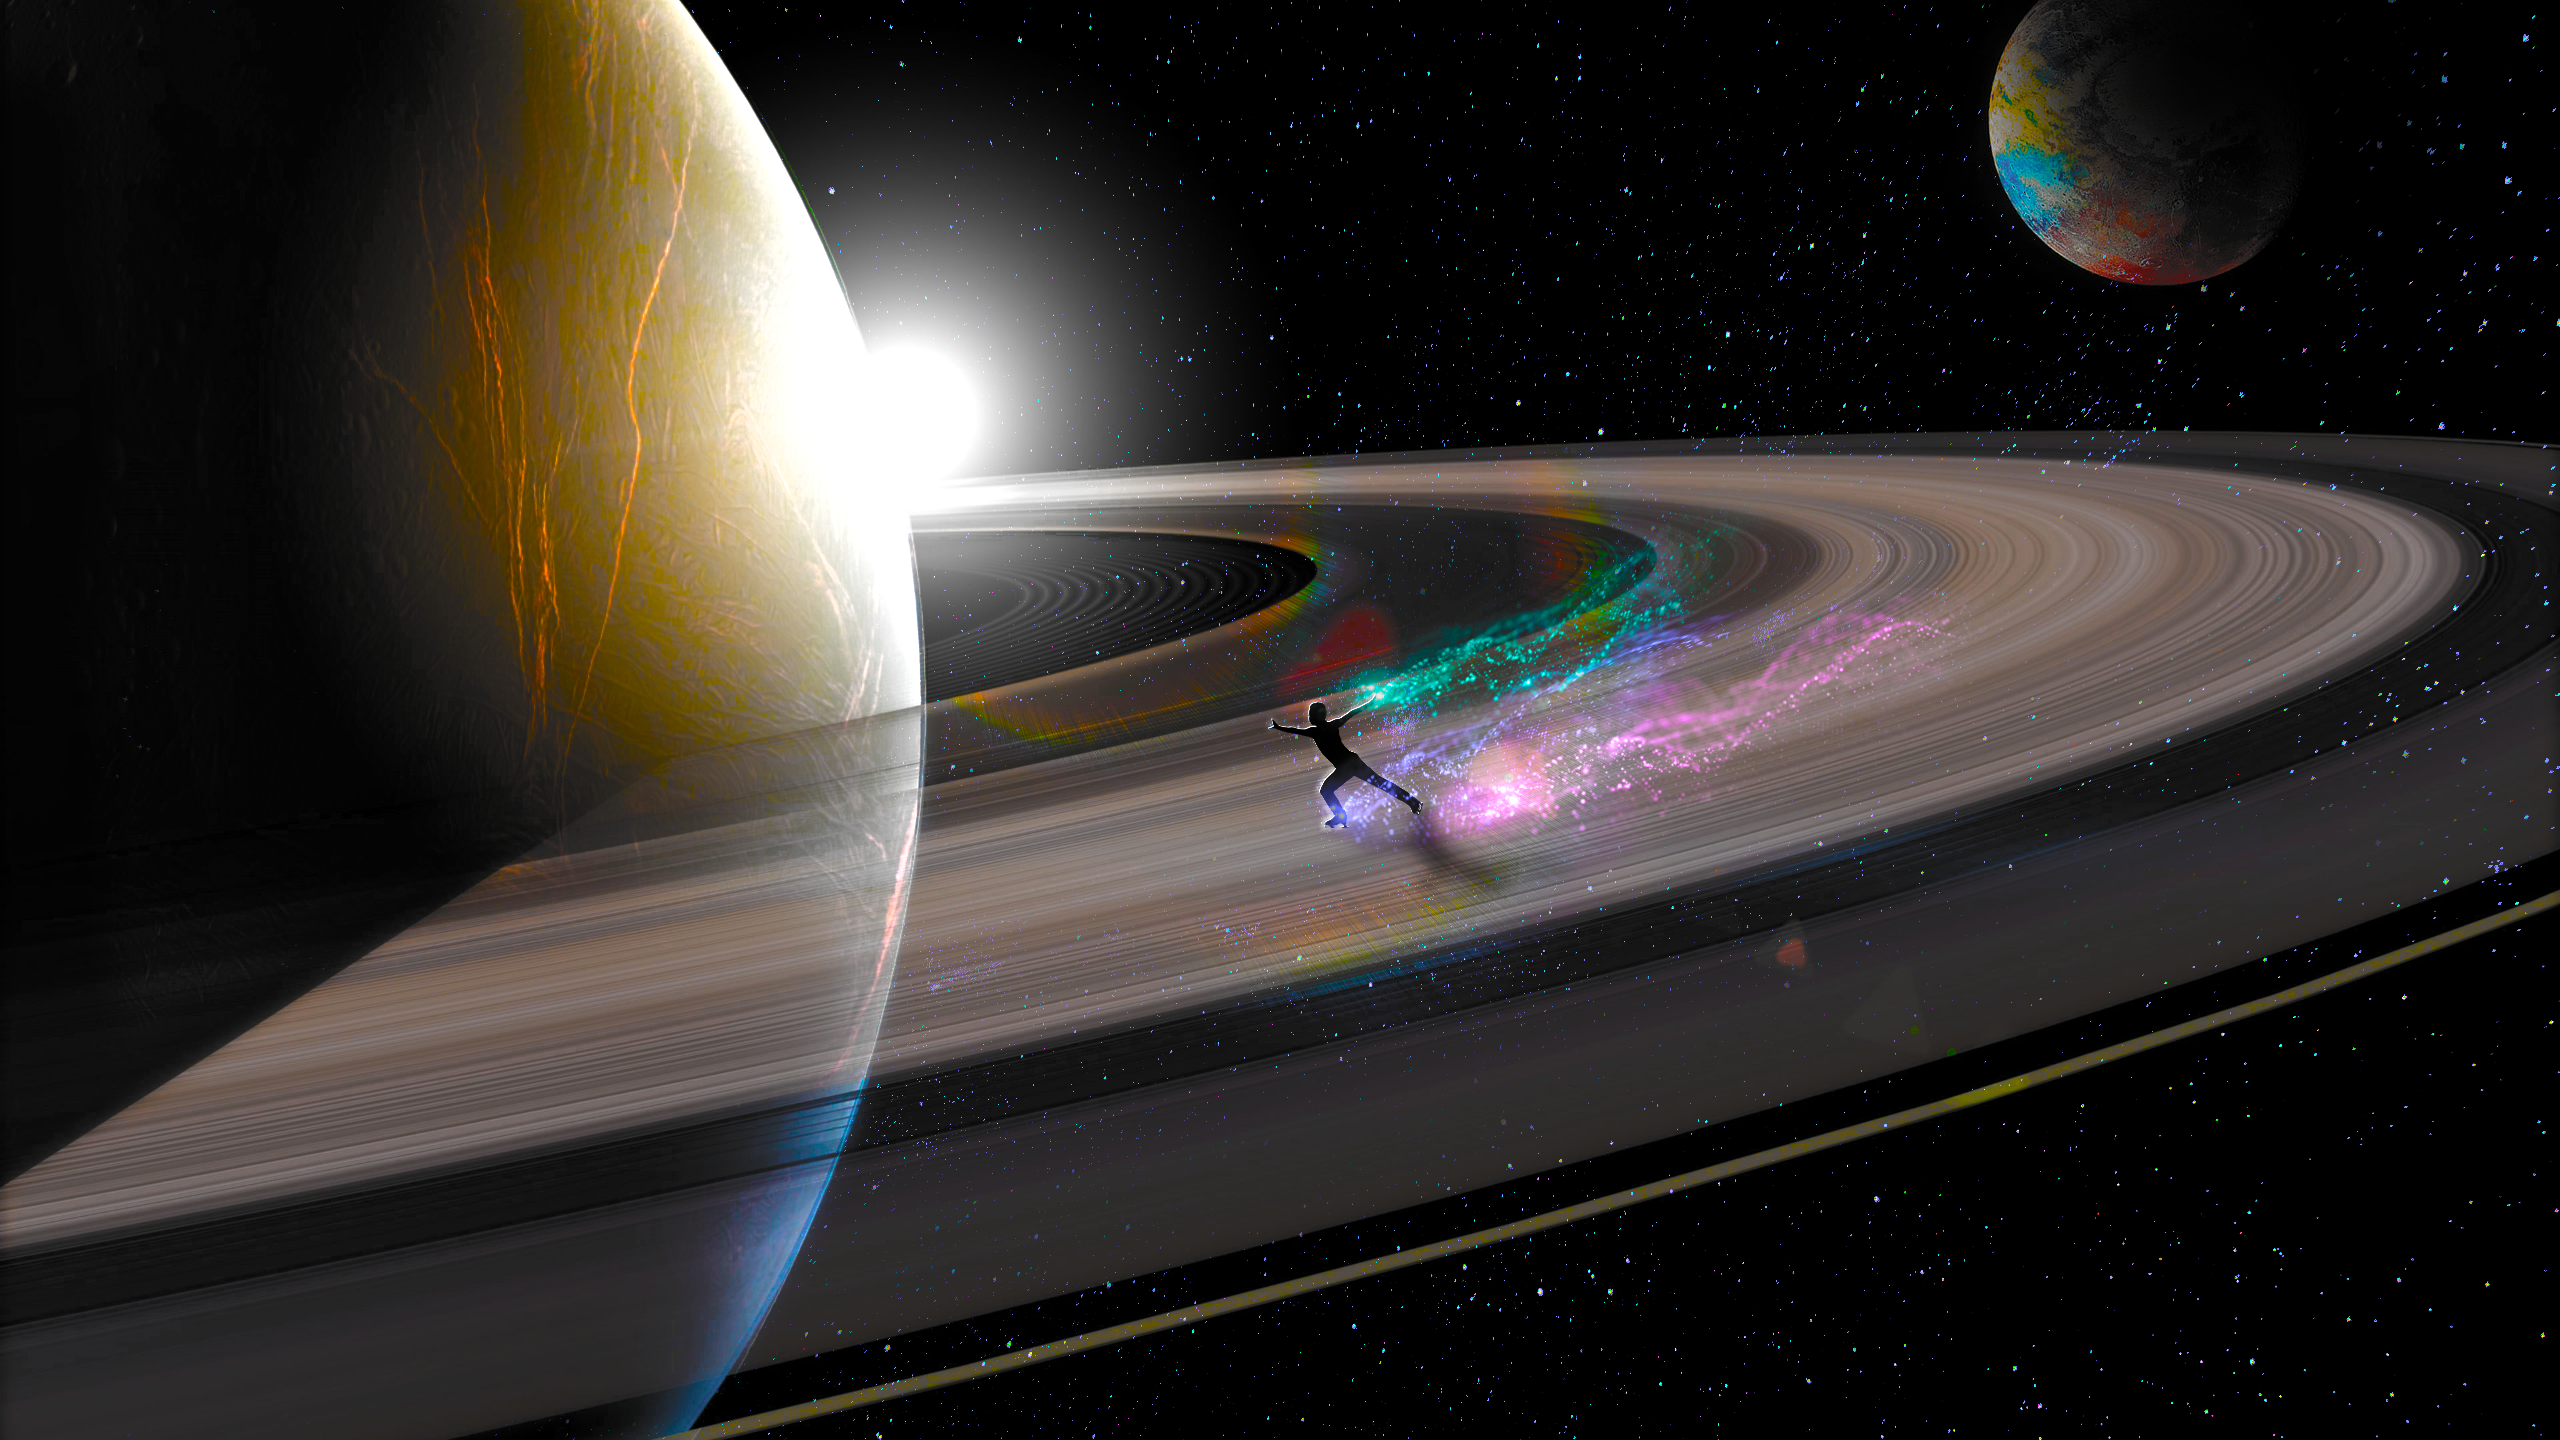 General 2560x1440 planet Saturn stars space space art planetary rings